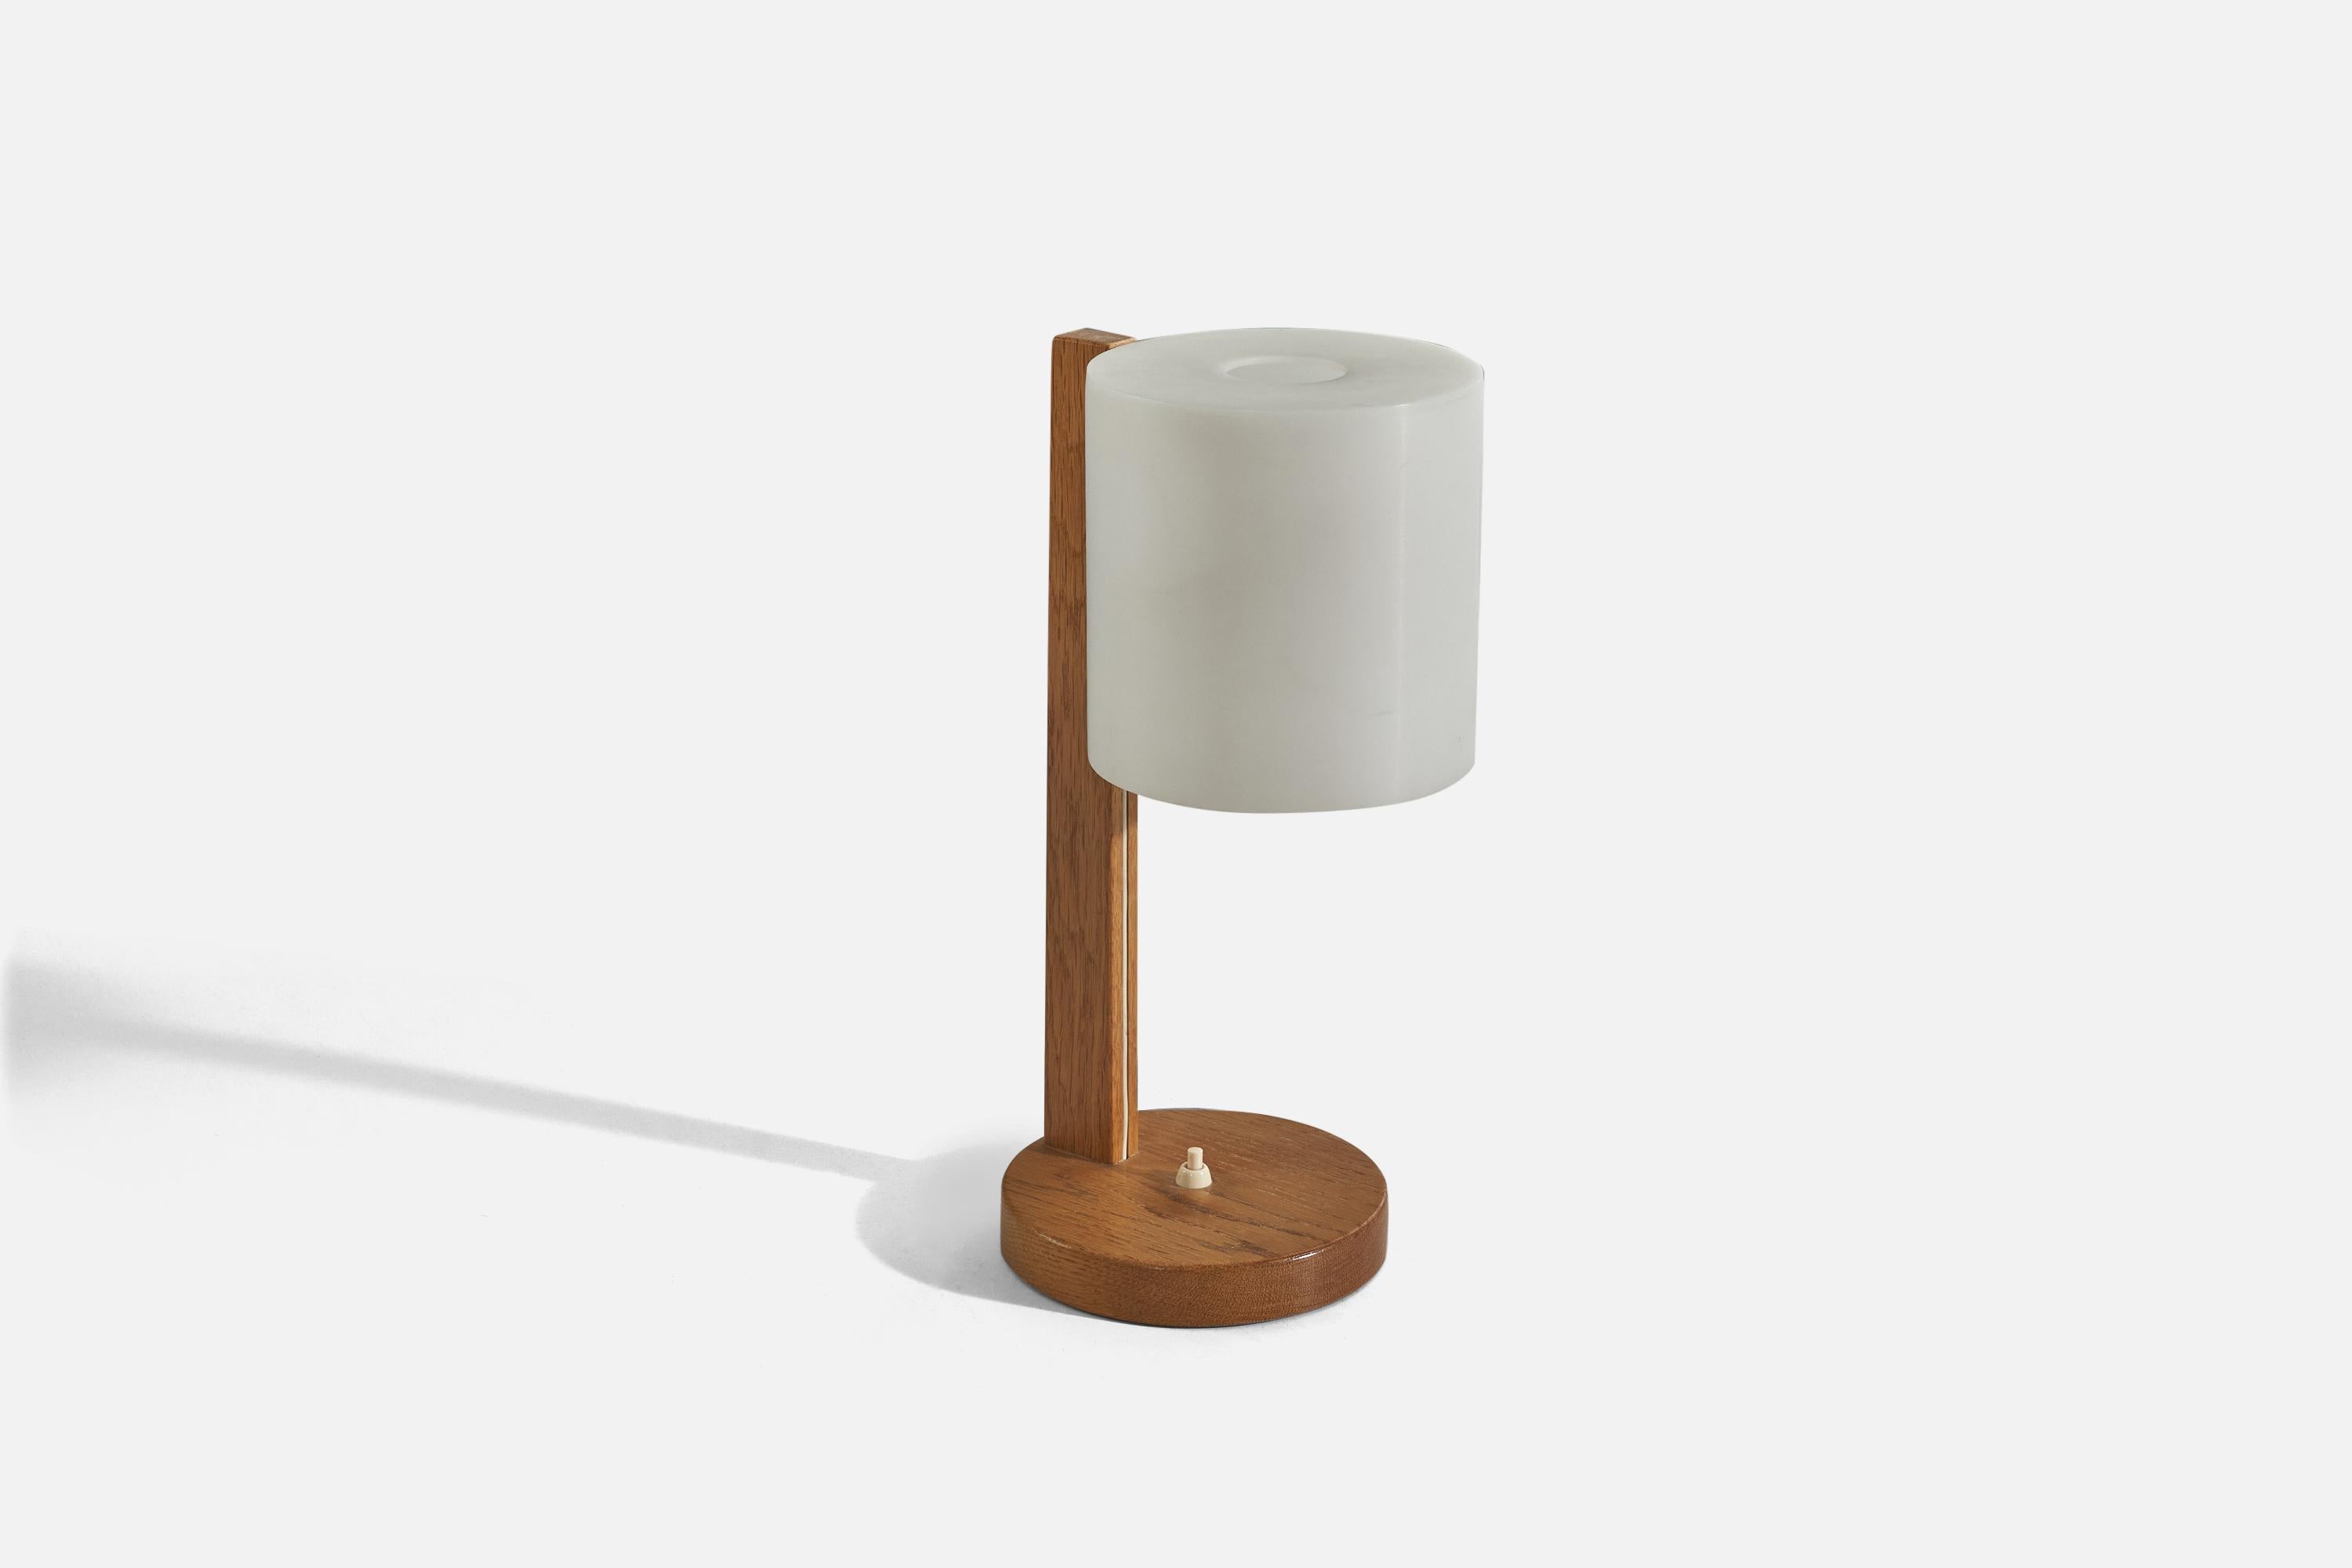 An oak and acrylic table lamp designed and produced by Uno Kristiansson, Sweden, 1960s.

Sold with Lampshade. 
Stated dimensions refer to the Lamp with the Shade.